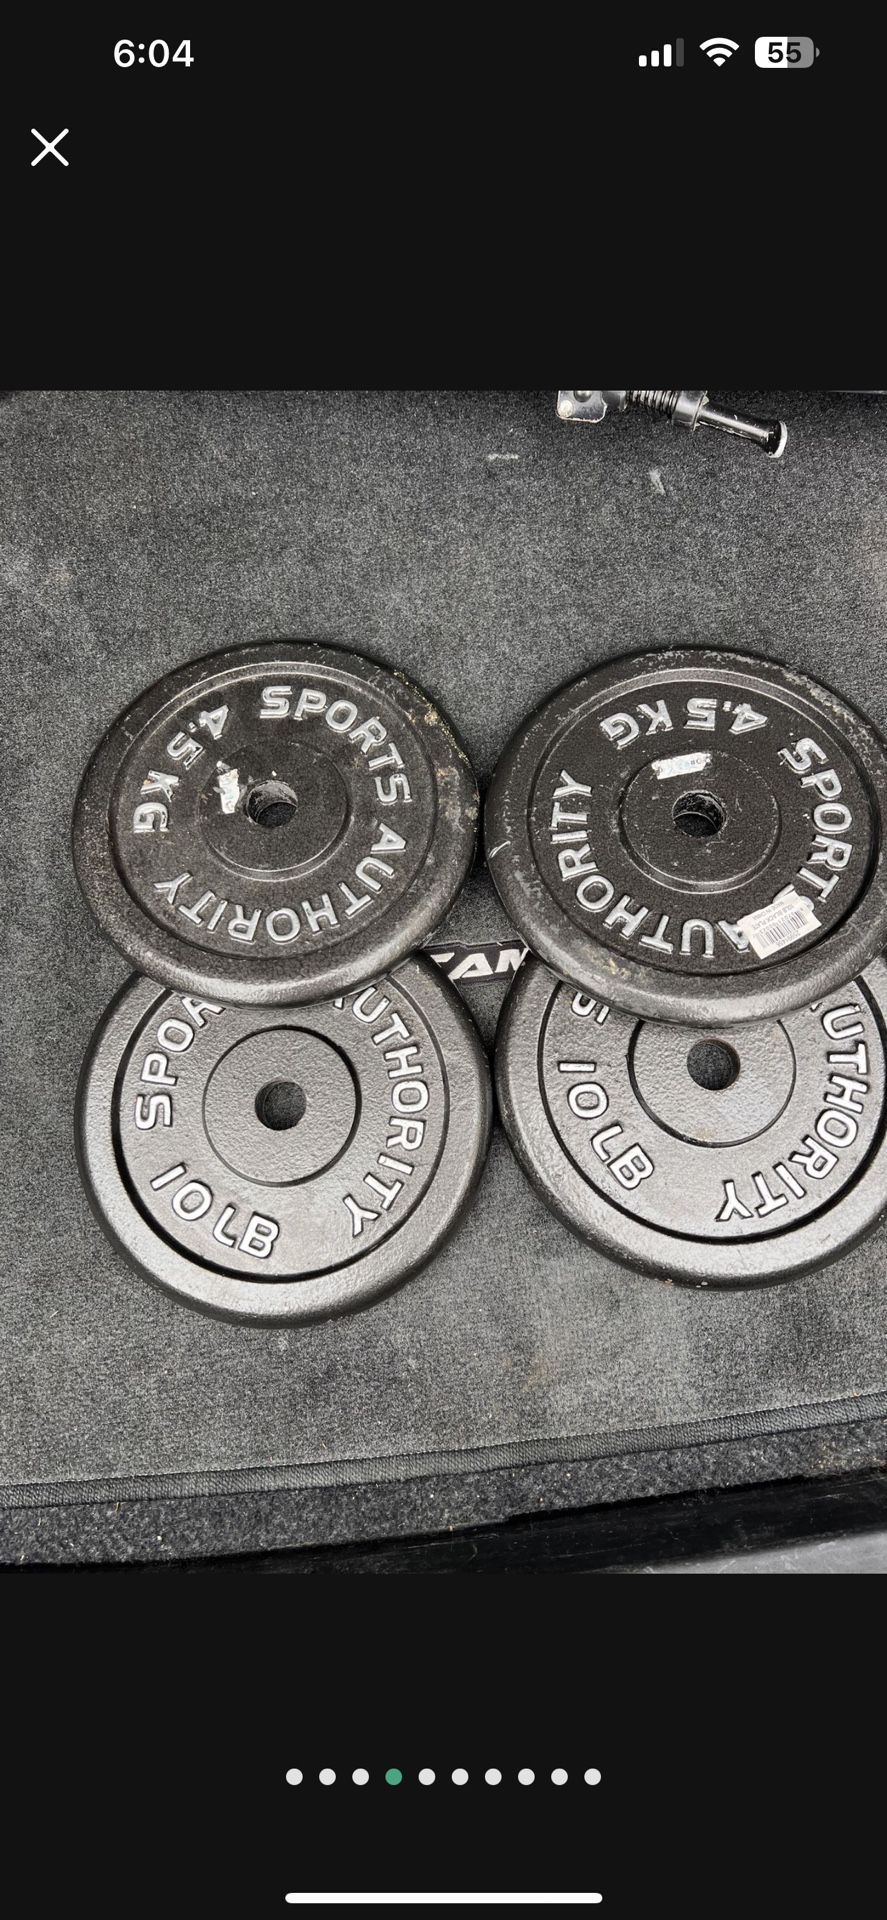 4 10 LB SOLID BARBELLS WEIGHT PLATES ALL FOR ONE PRICE 